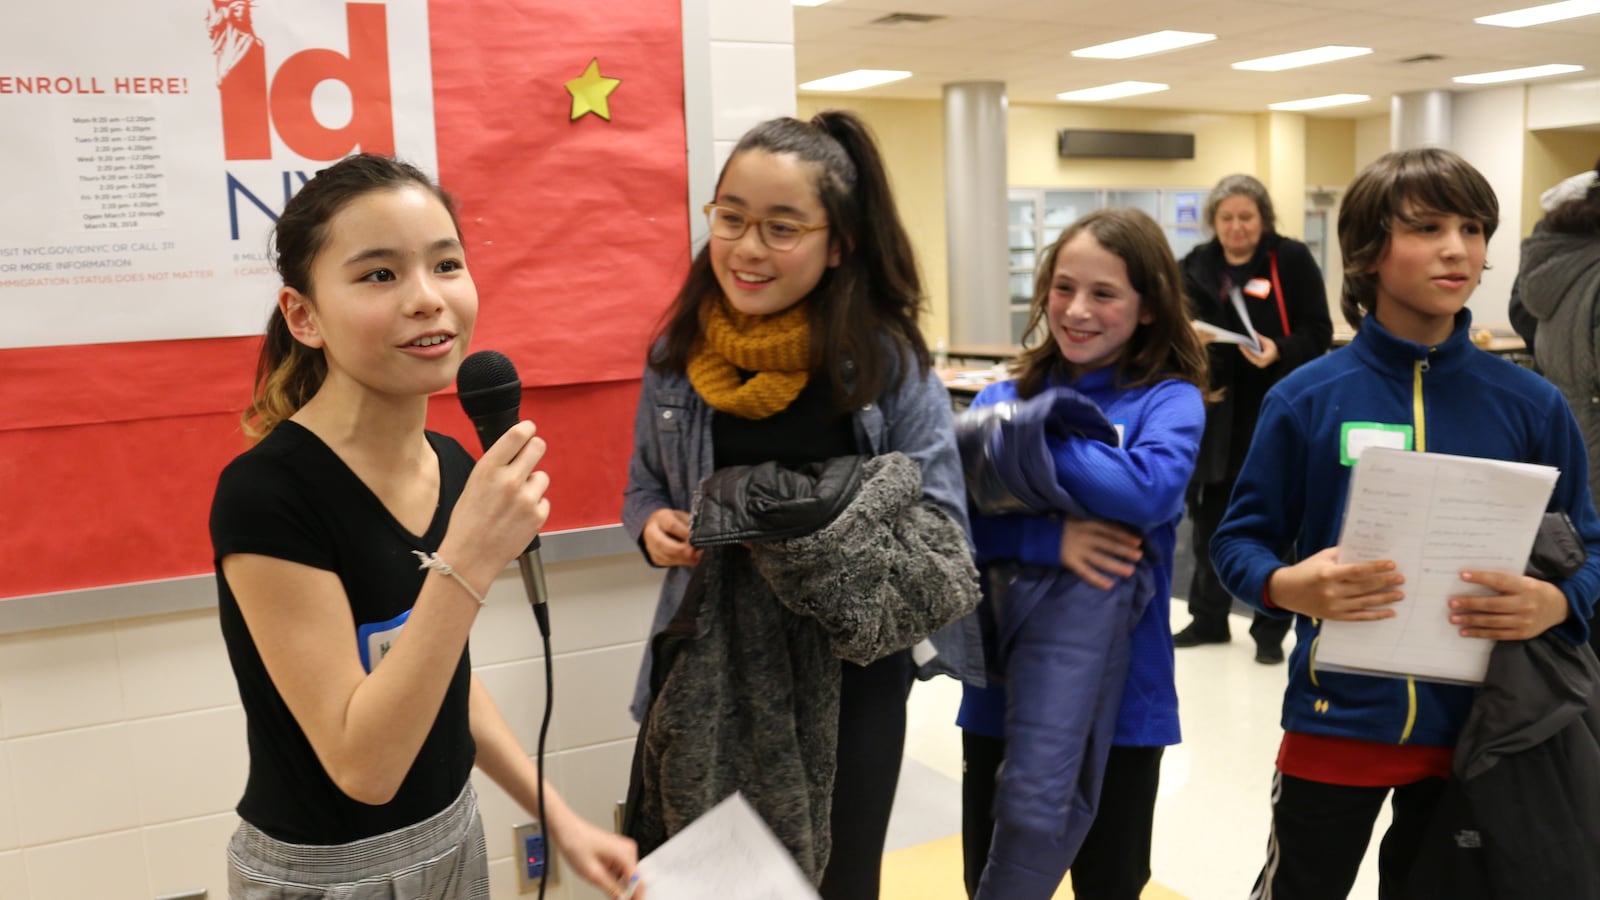 Matilda and Eliza Seki, left, and their friends Noa and Benji Weiss, right, collected signatures at a district 15 meeting to discuss middle school integration efforts.